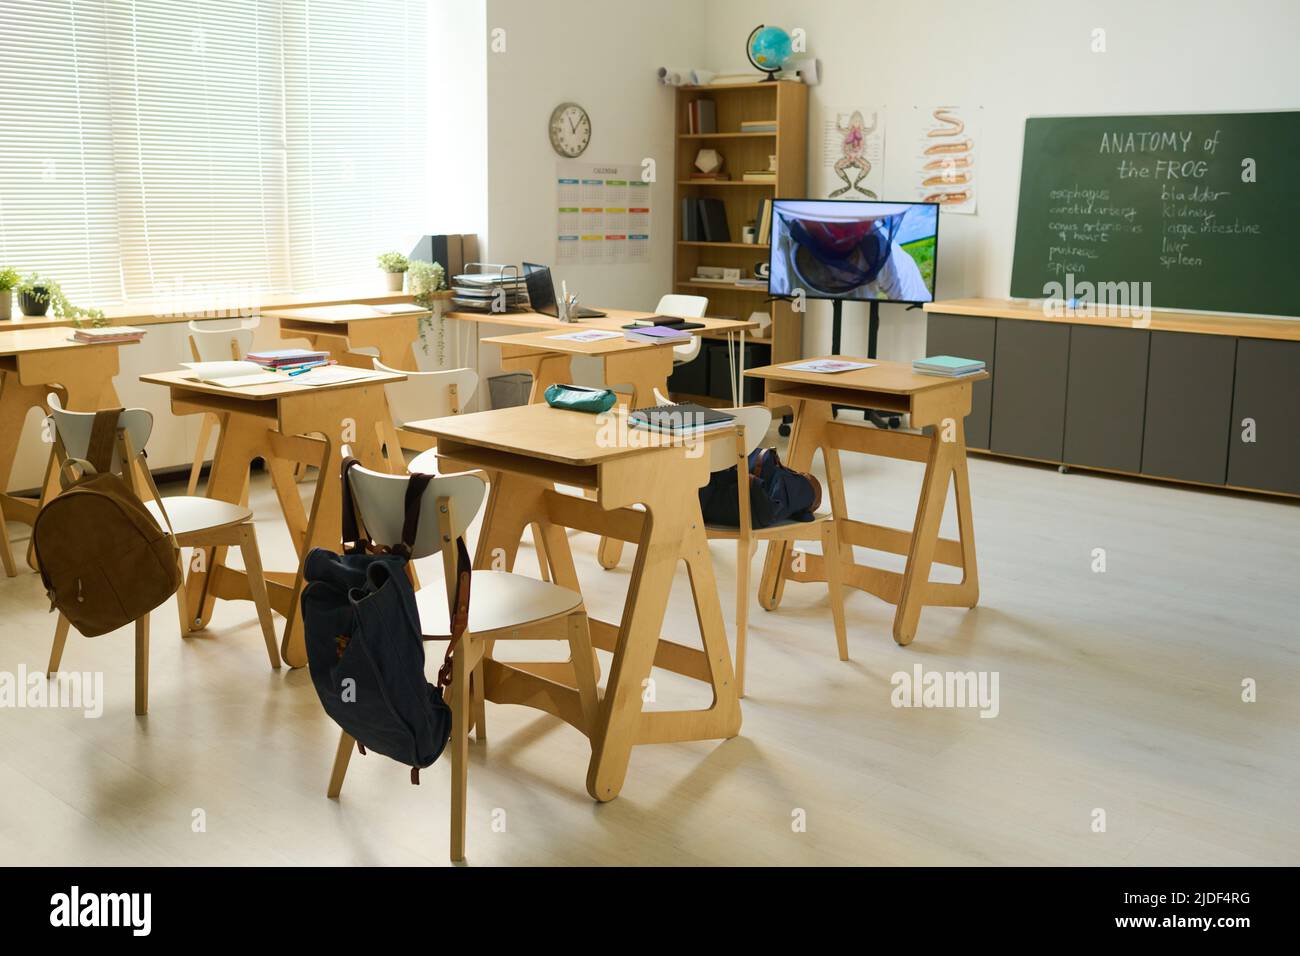 spacious-classroom-of-biology-or-anatomy-with-several-wooden-desks-with